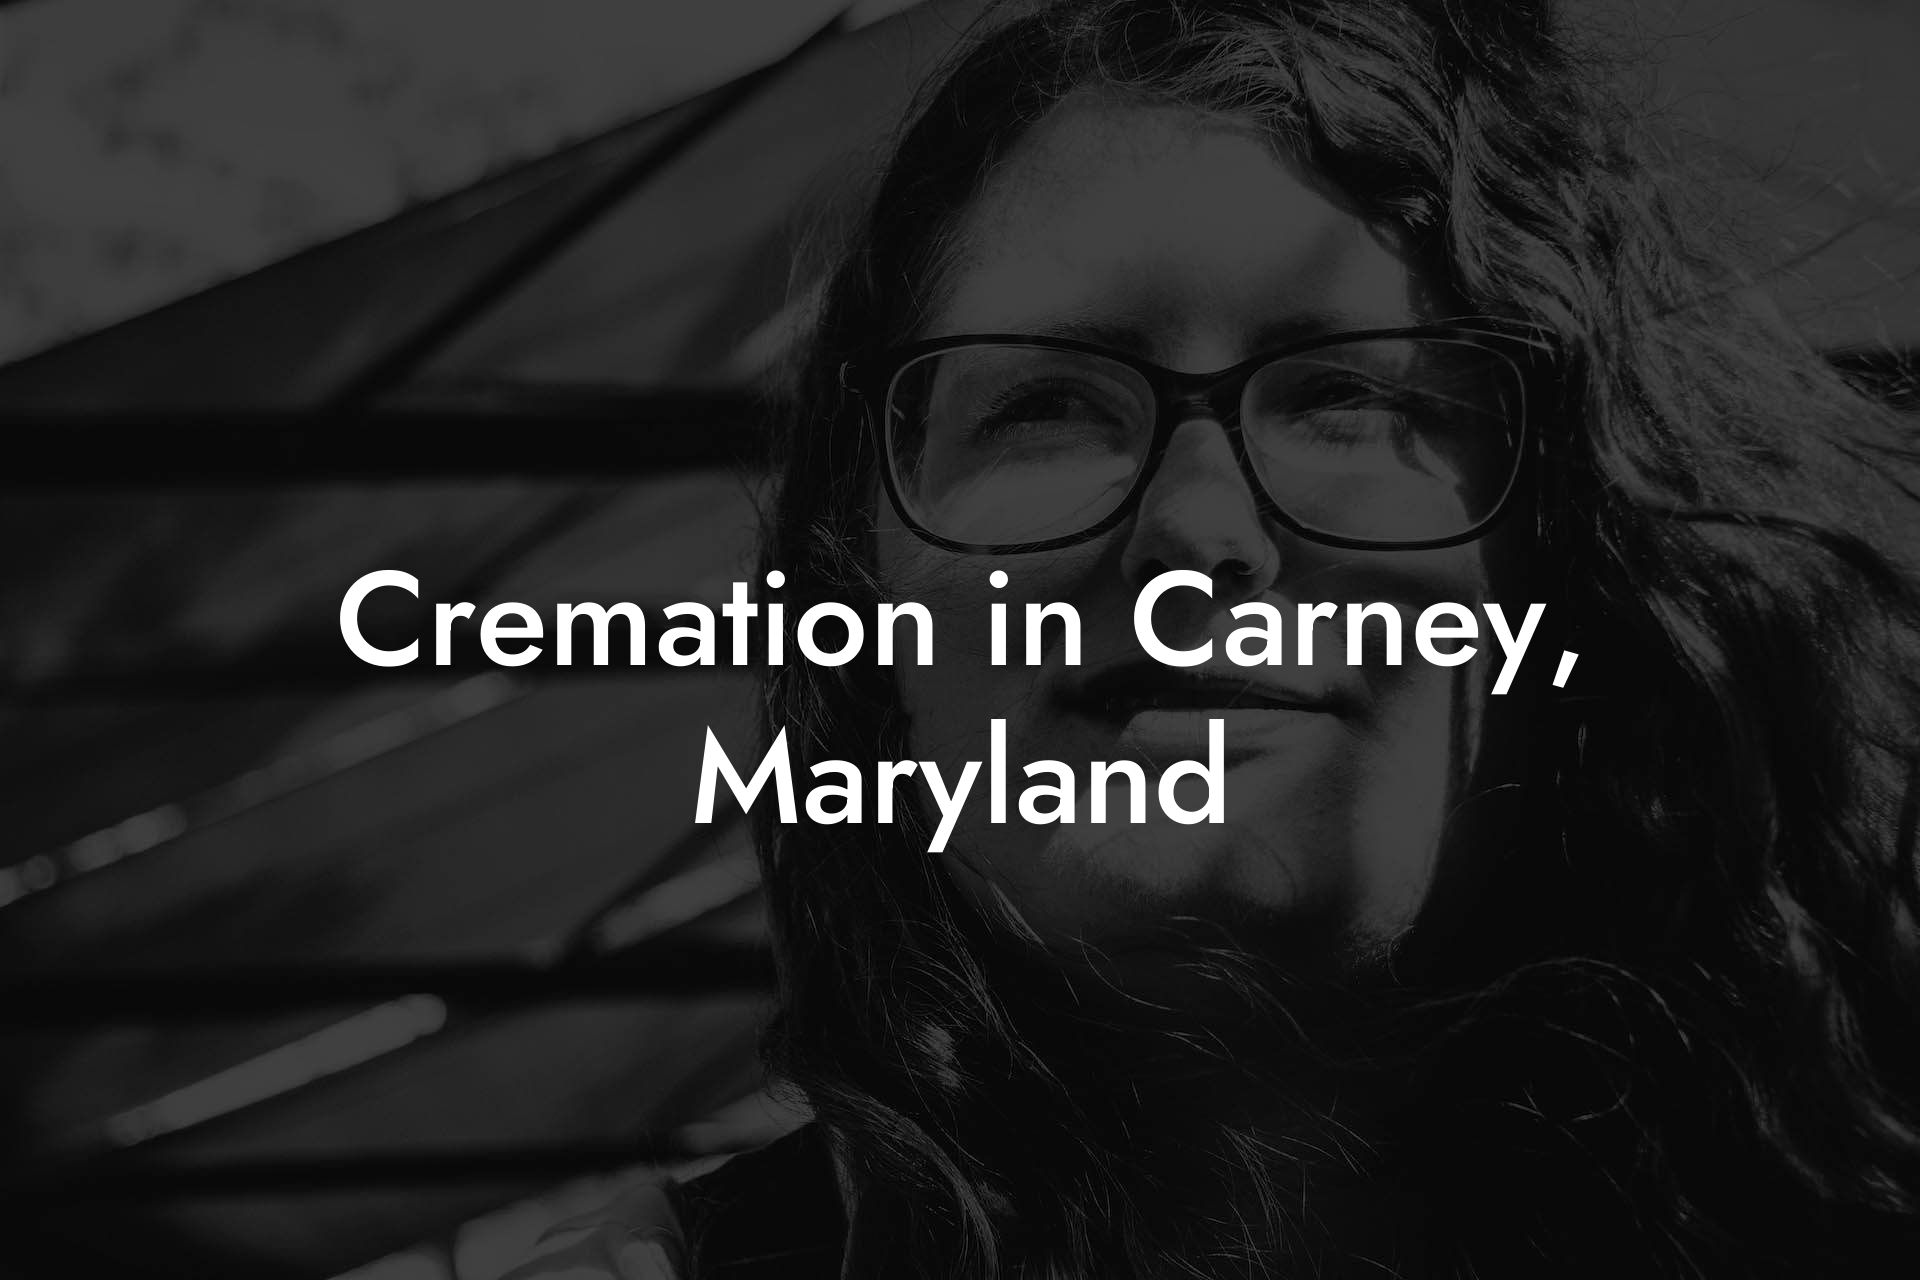 Cremation in Carney, Maryland